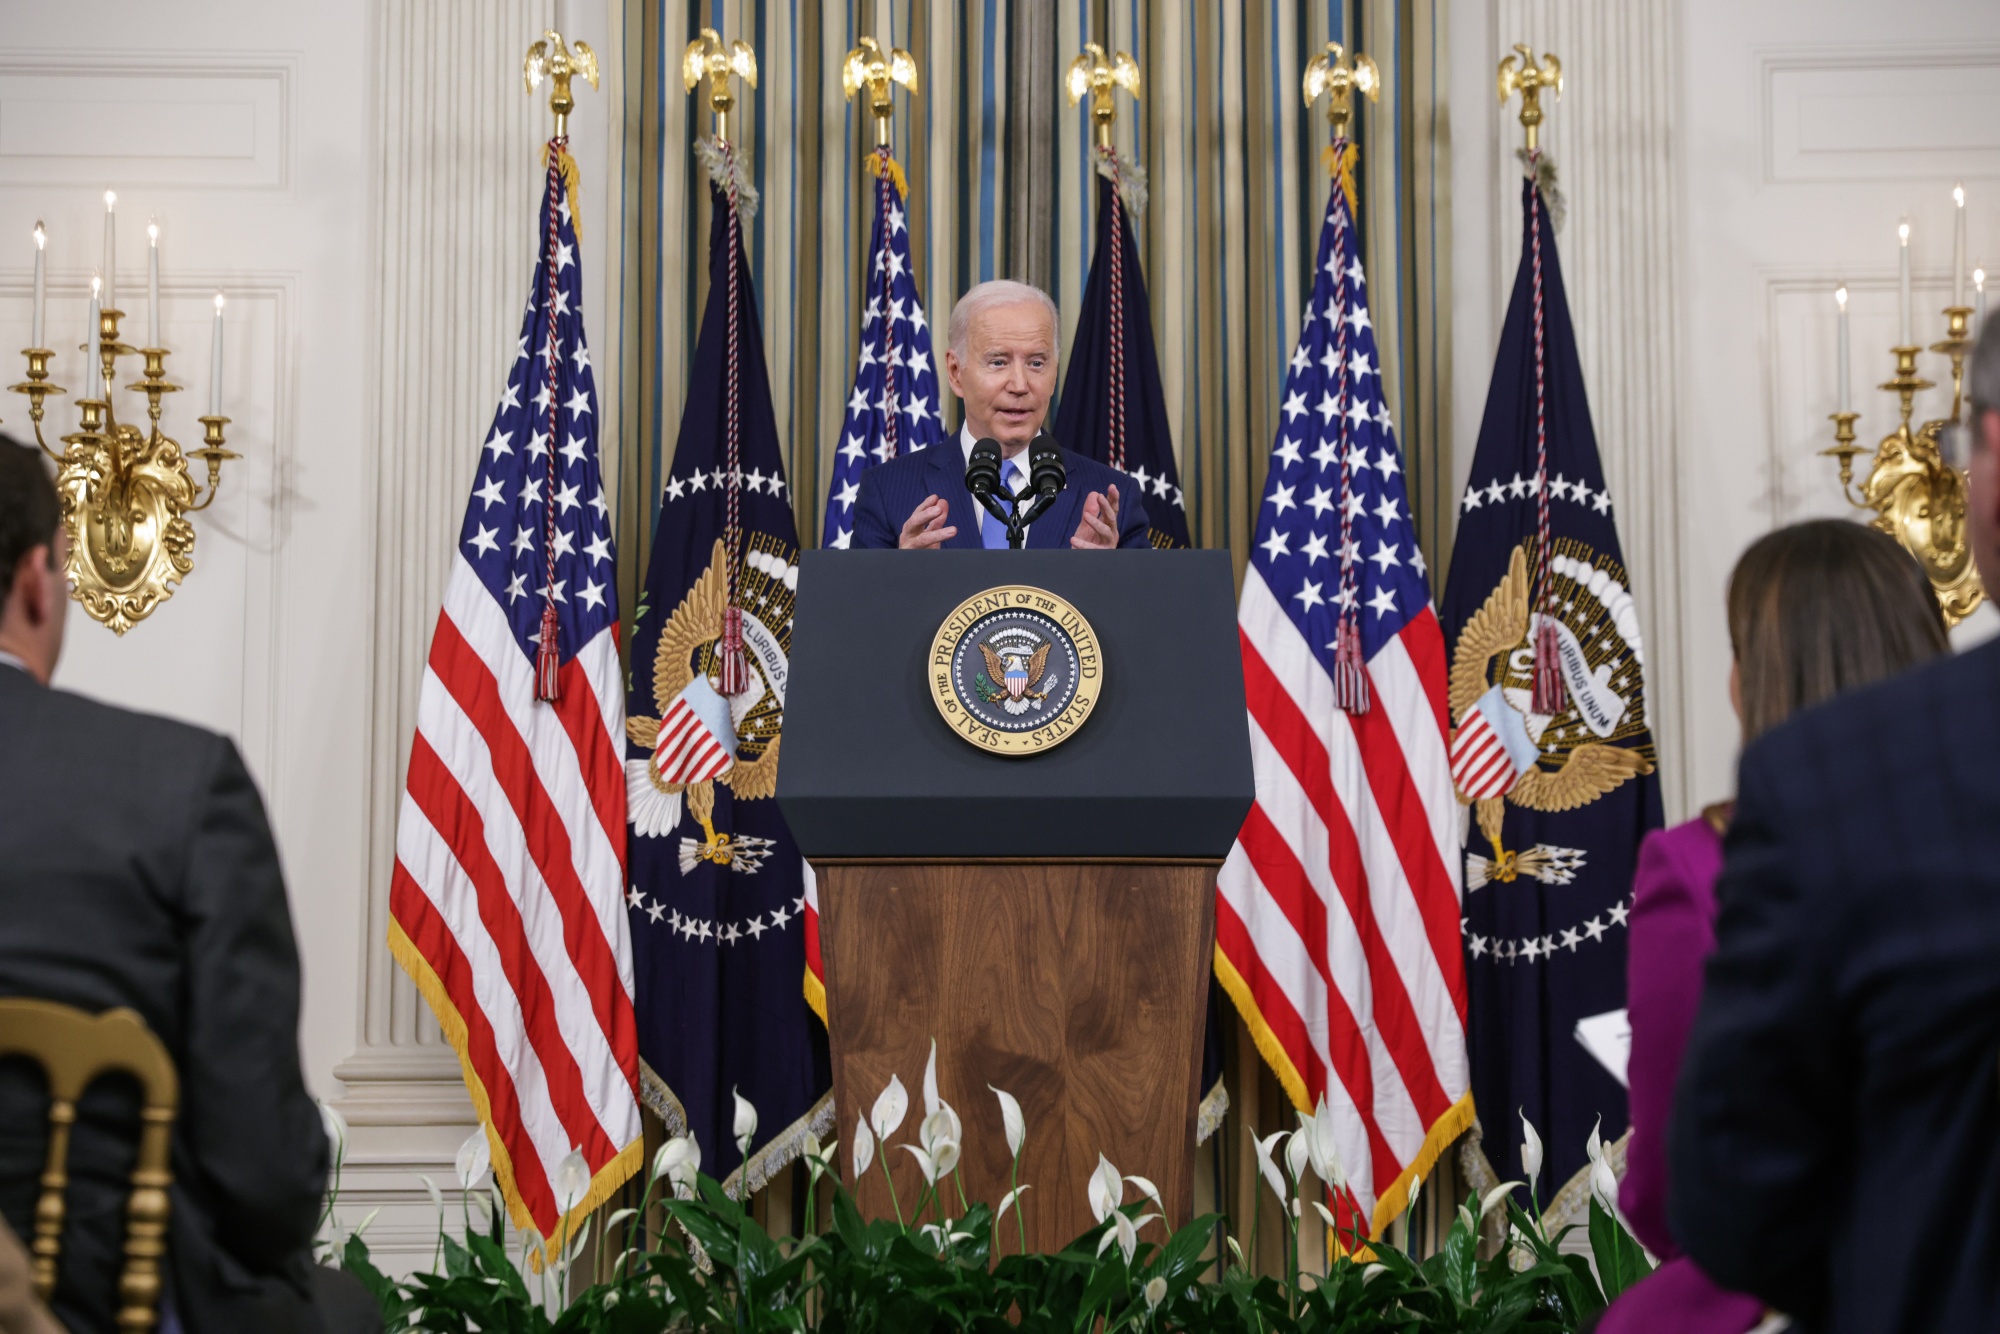 President Biden speaks during a news conference in the State Dining Room of the White House on Nov. 9.